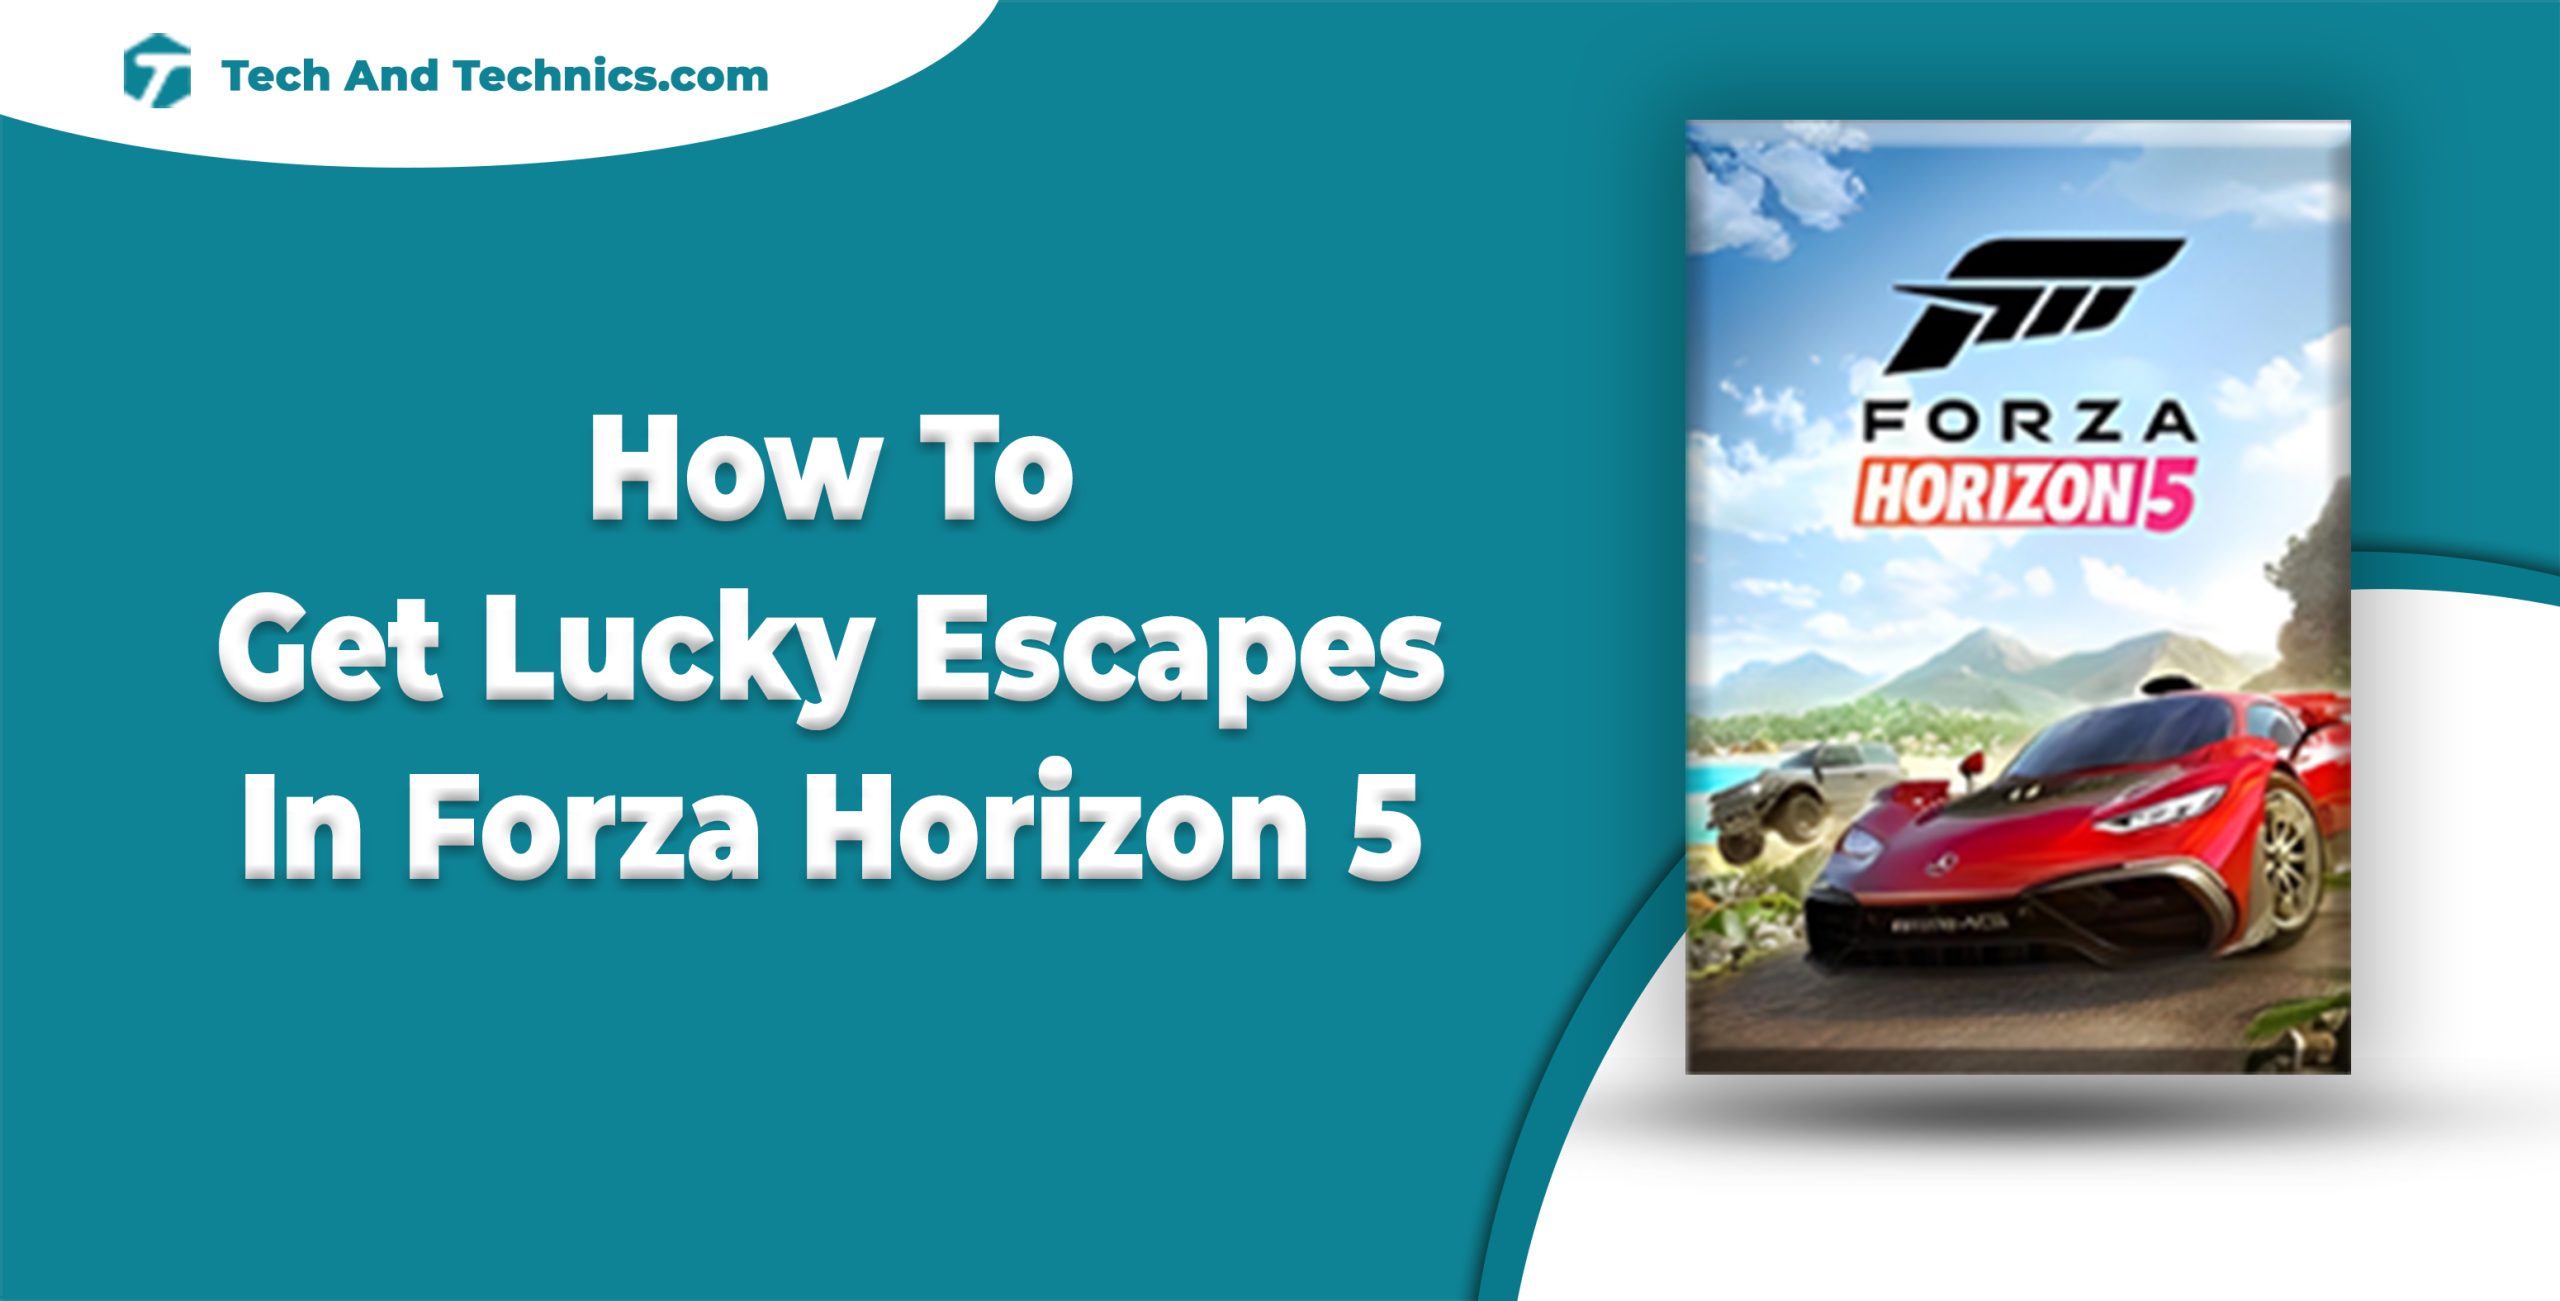 How To Get Lucky Escapes In Forza Horizon 5 (Guide)